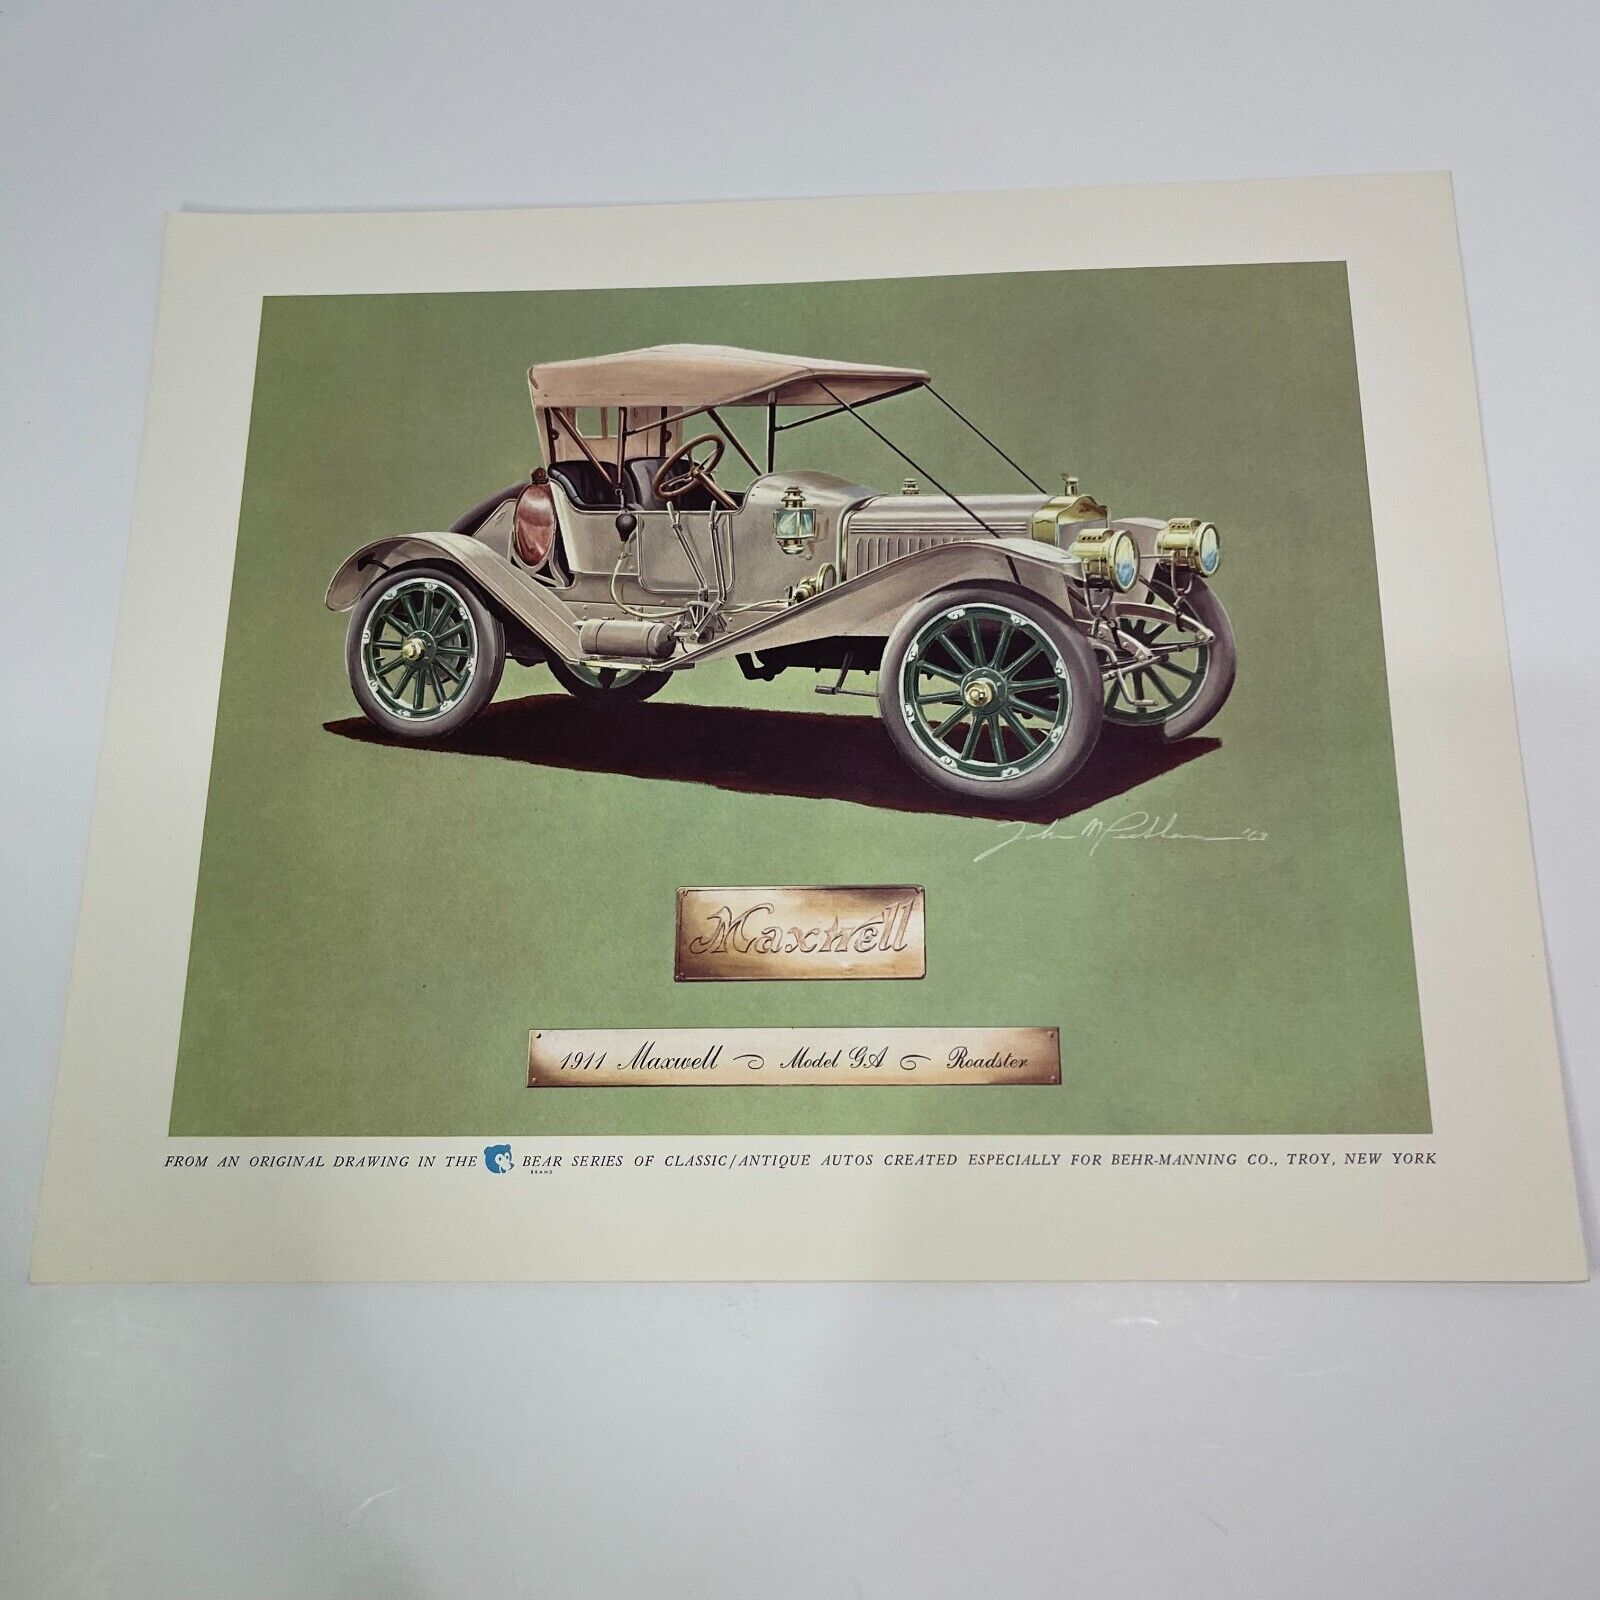 1911 Maxwell Model GA Roadster Classic Automobile Auto Print Behr-Manning Co.